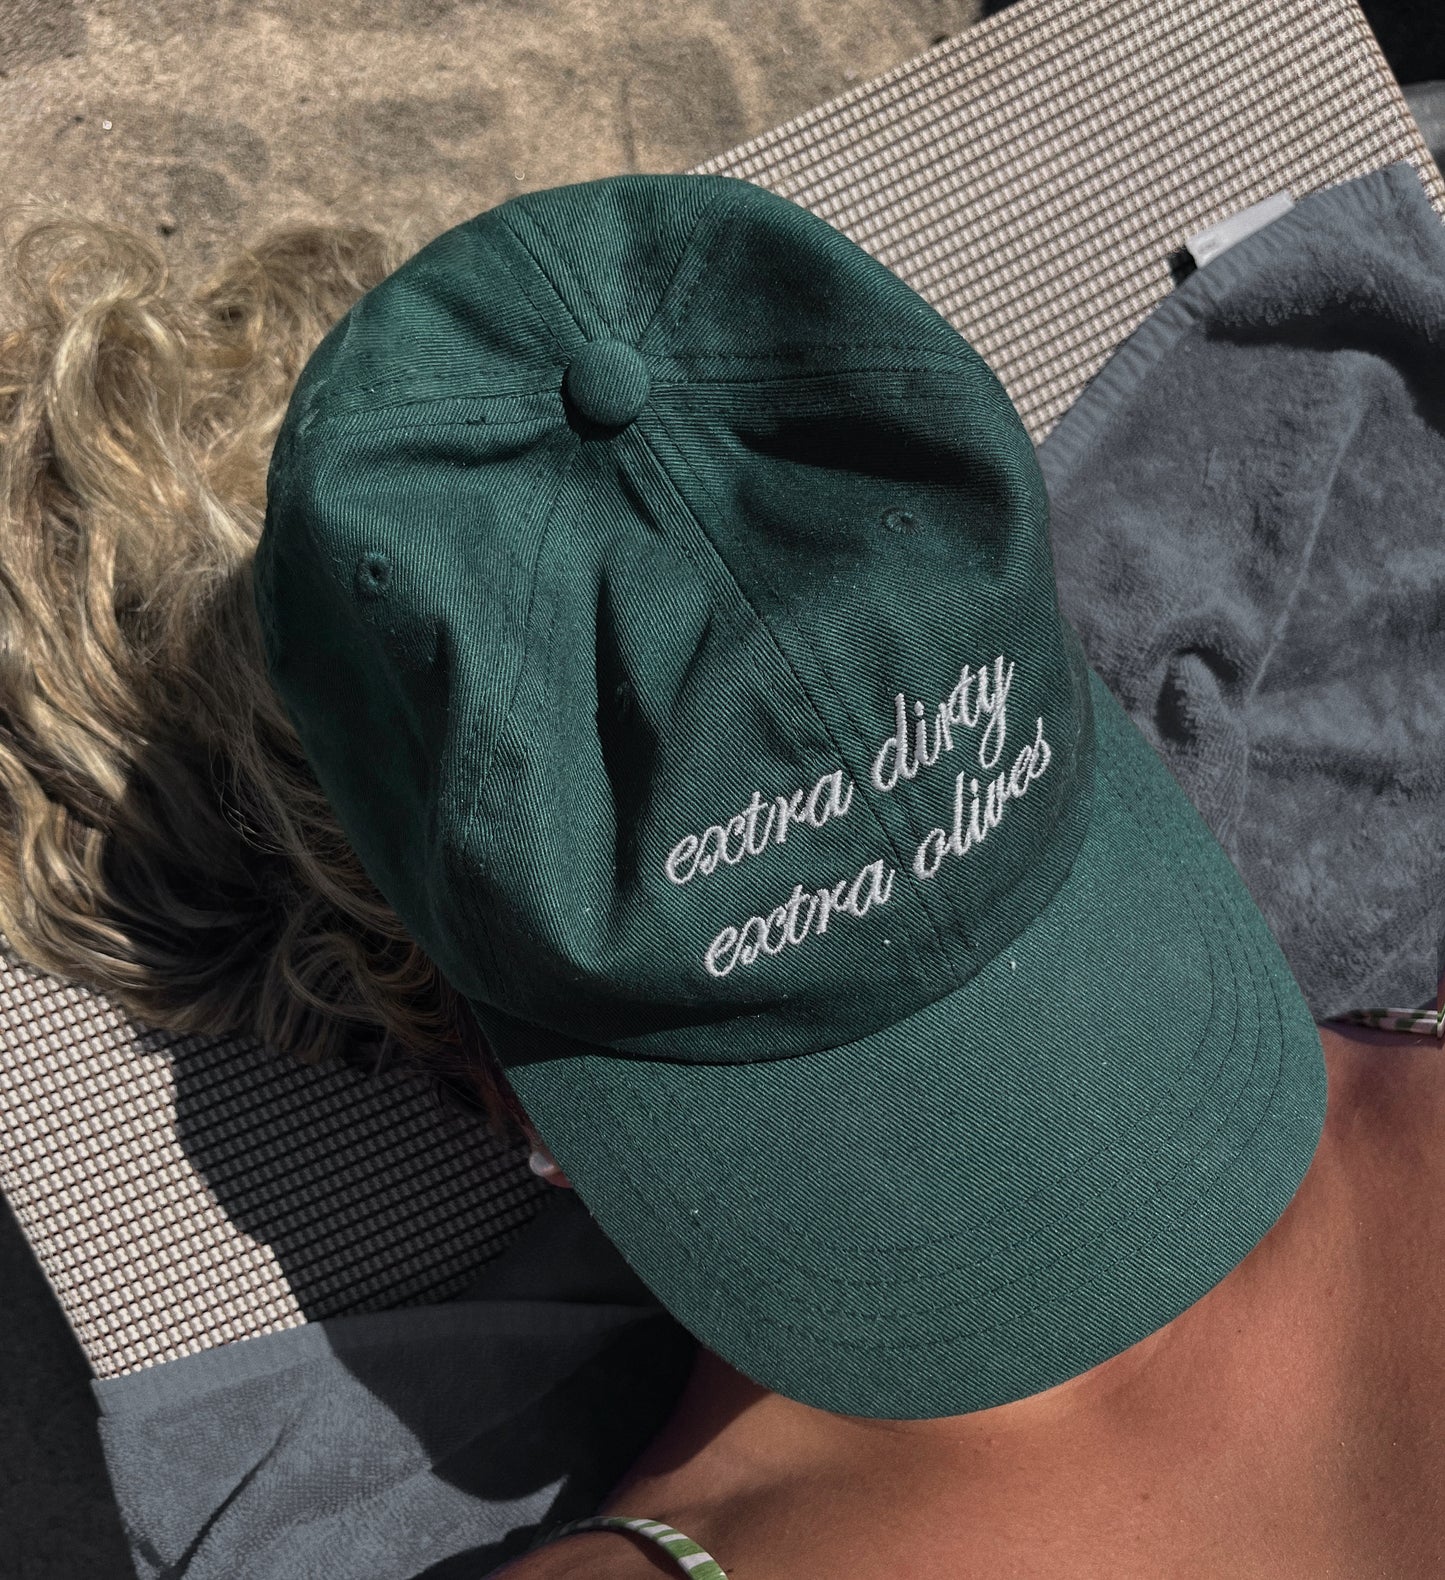 'Extra Dirty, Extra Olives'™ Dad Hat